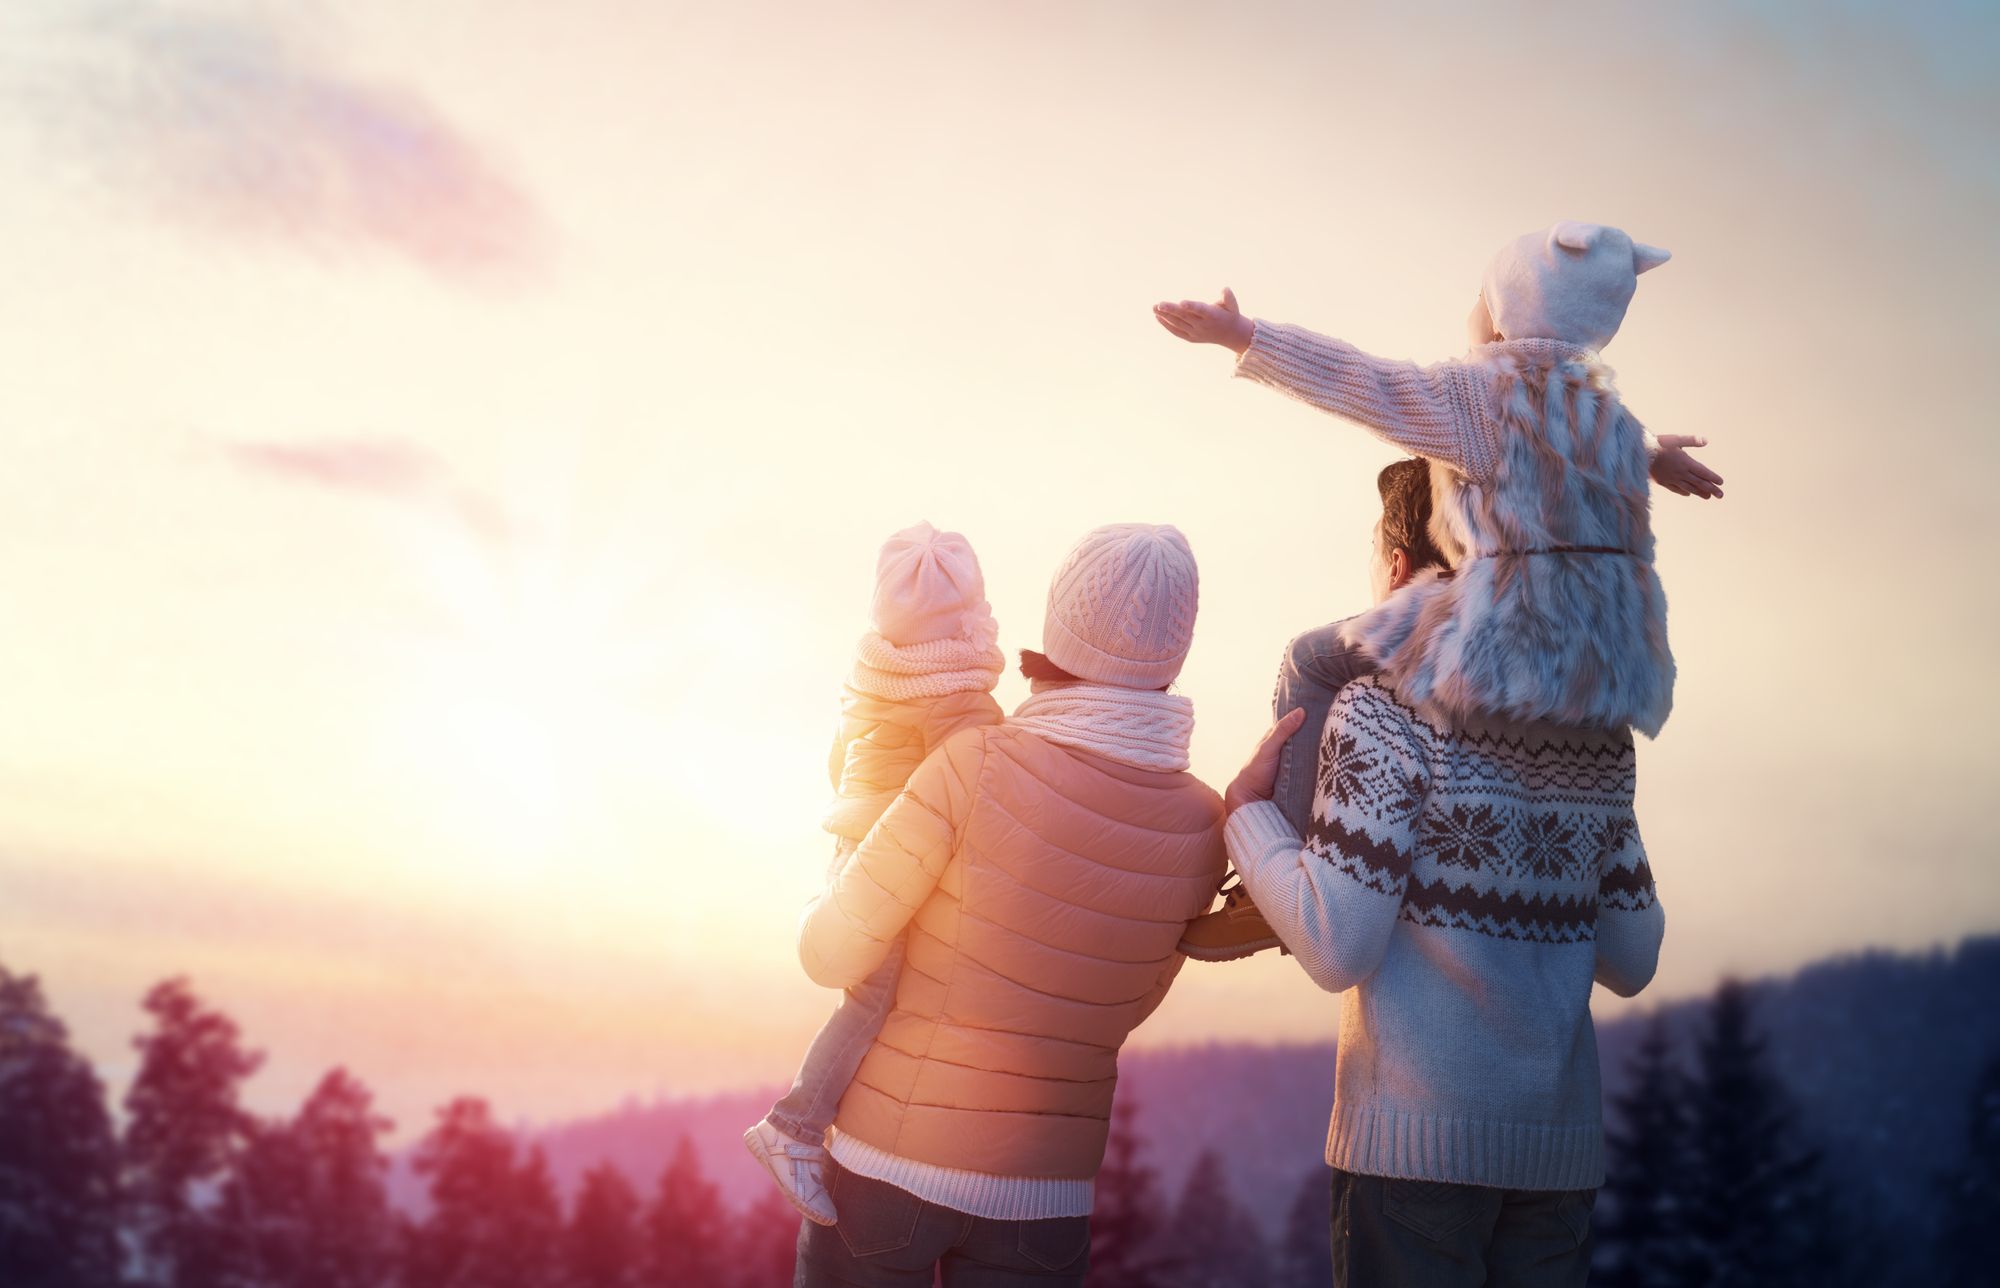 Top 10 Kid-Friendly Resorts To Visit For Your Winter Vacation